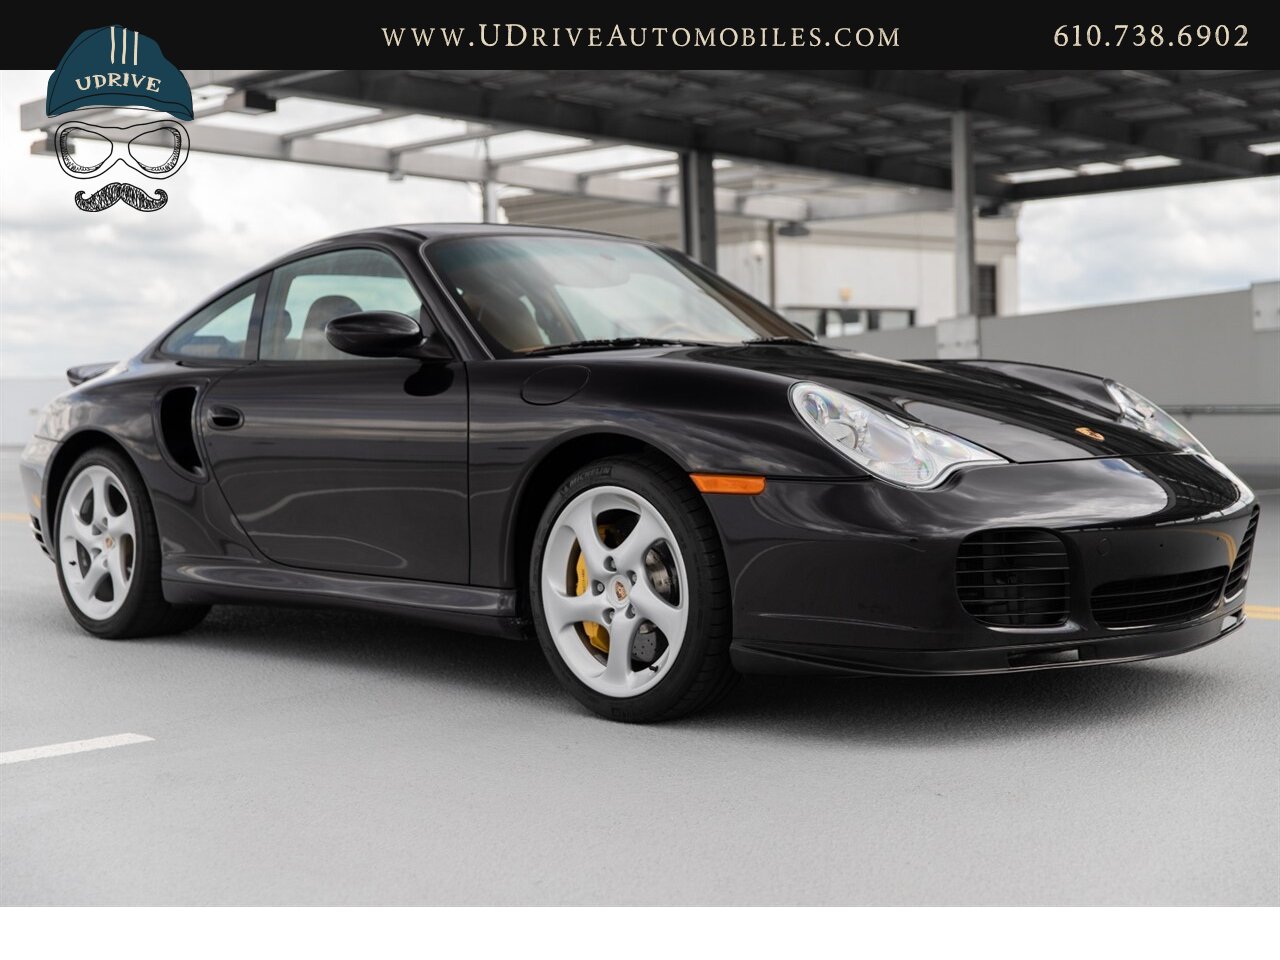 2005 Porsche 911 Turbo S 6 Speed 14k Miles Sport Sts Painted Backs  Natural Brown Lthr $144,070 MSRP - Photo 14 - West Chester, PA 19382